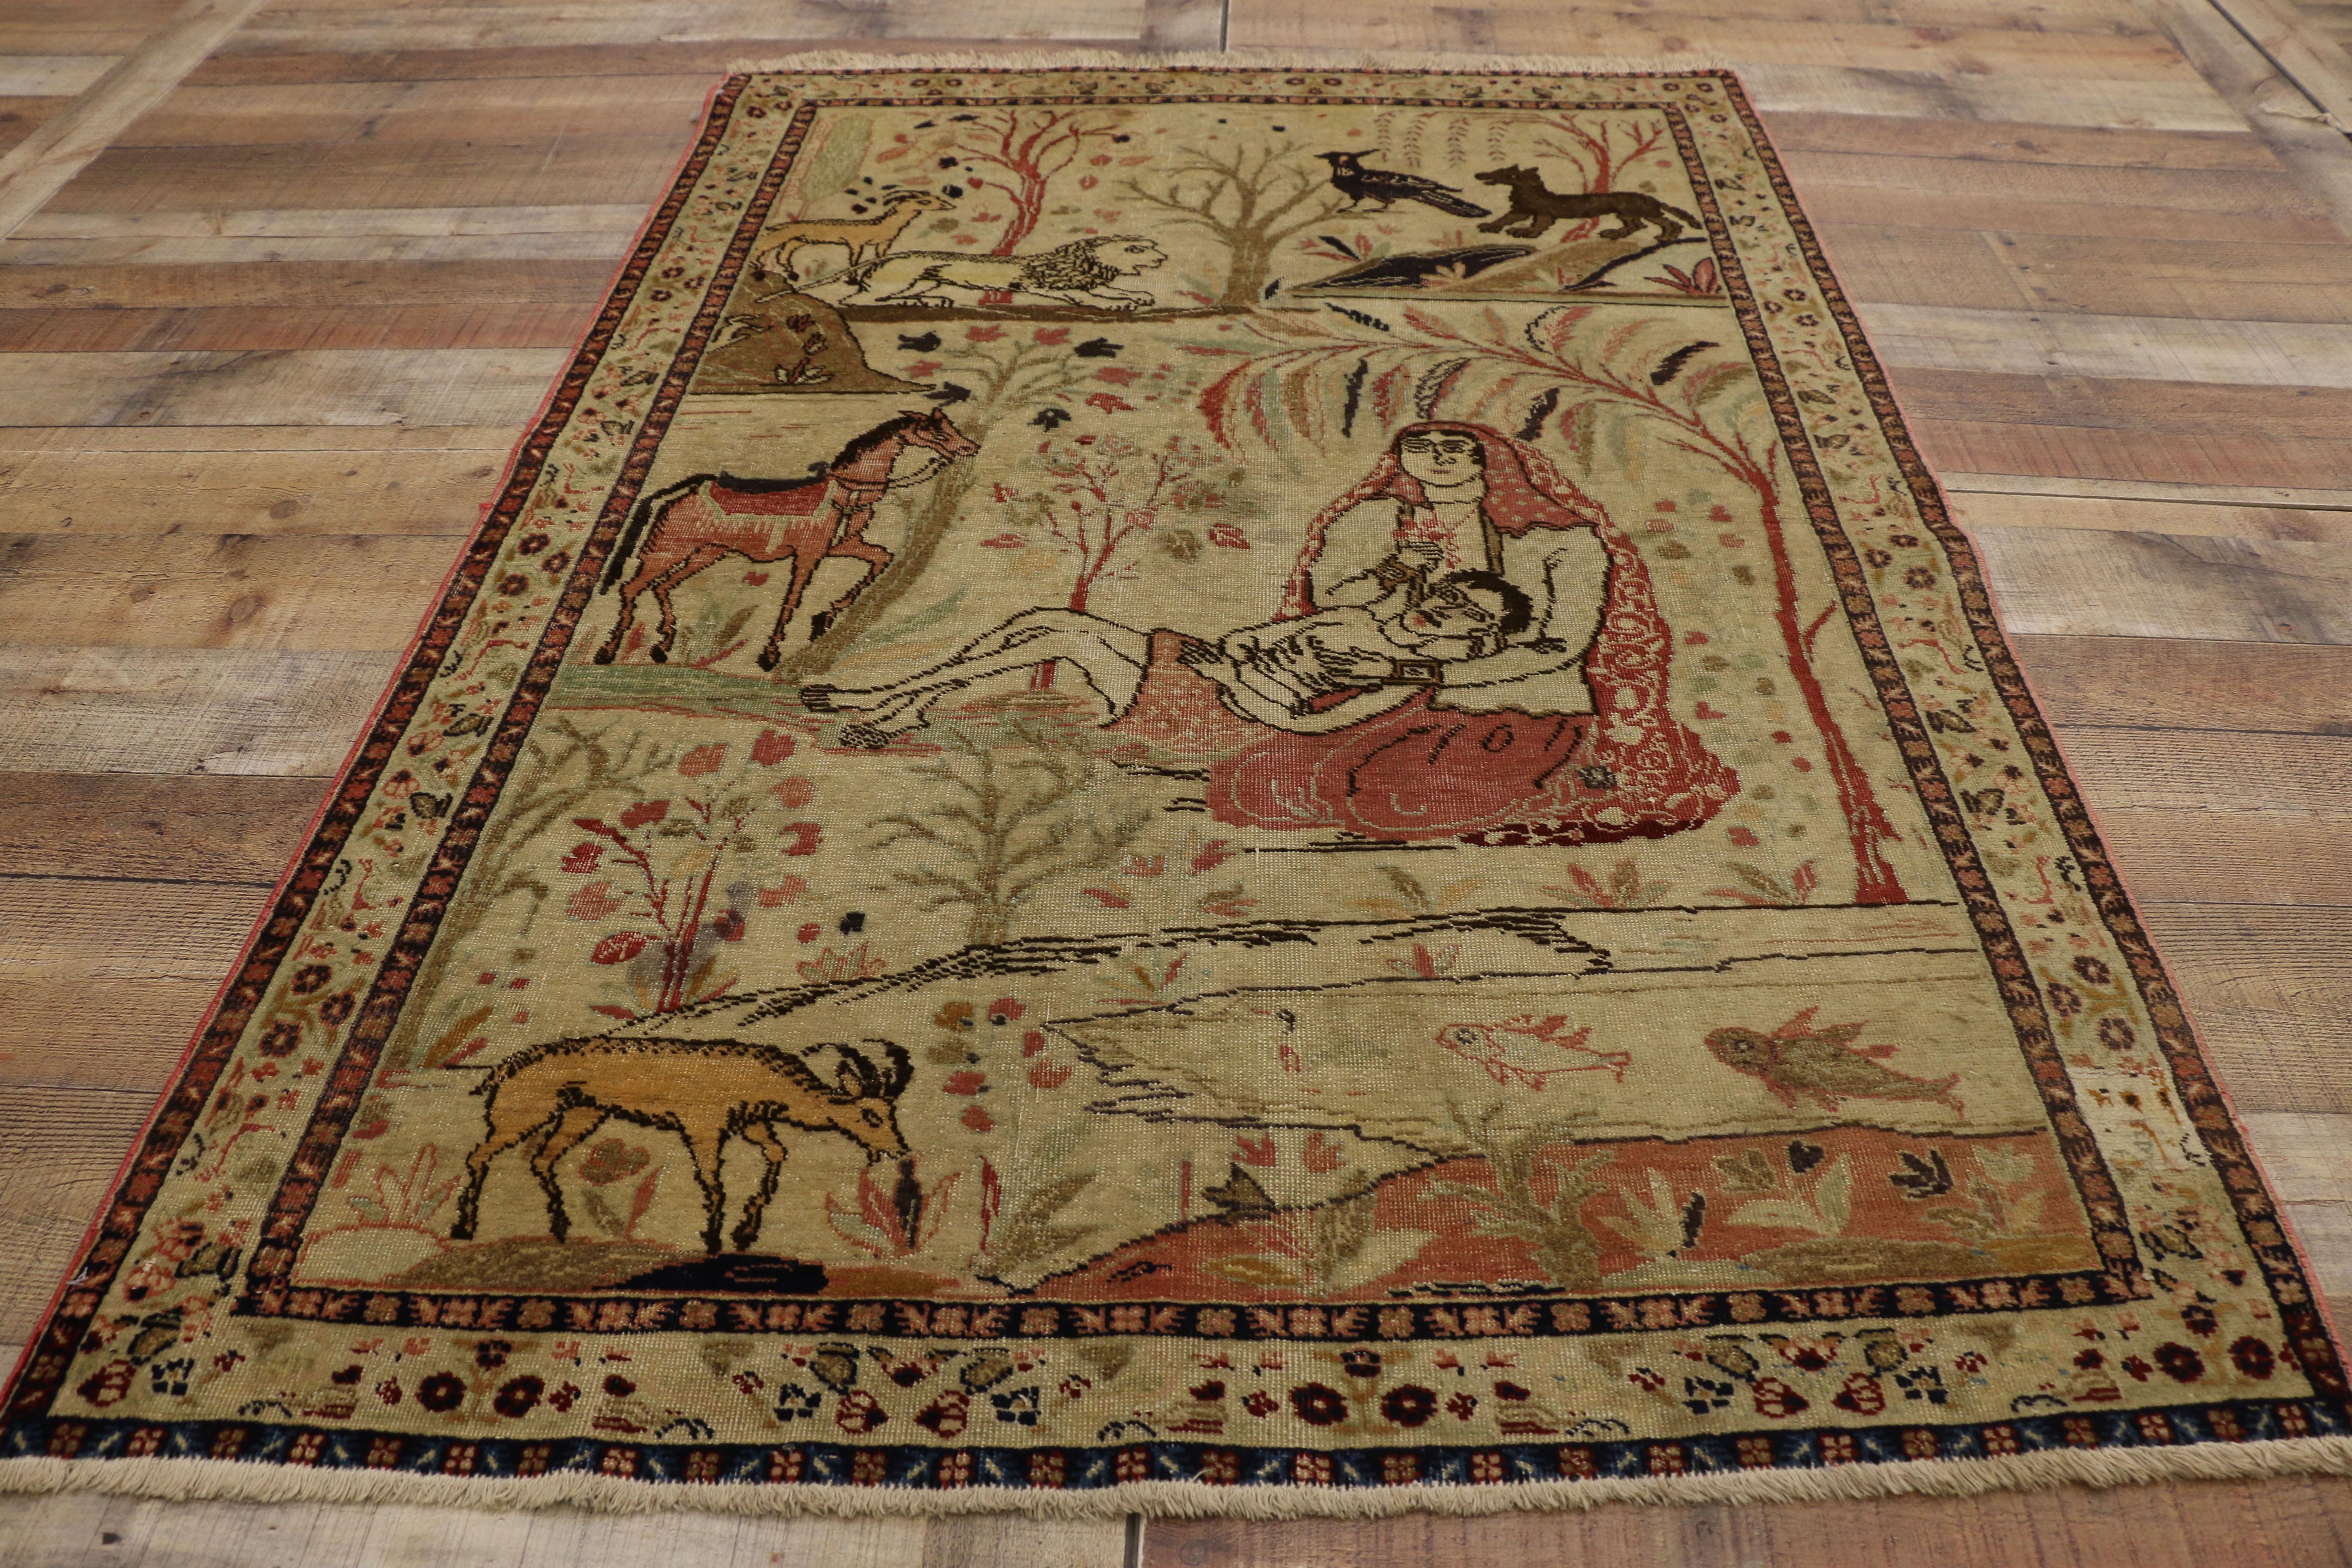 Hand-Knotted Antique Tabriz Persian Pictorial Rug, Persian Wall Hanging, Landscape Tapestry